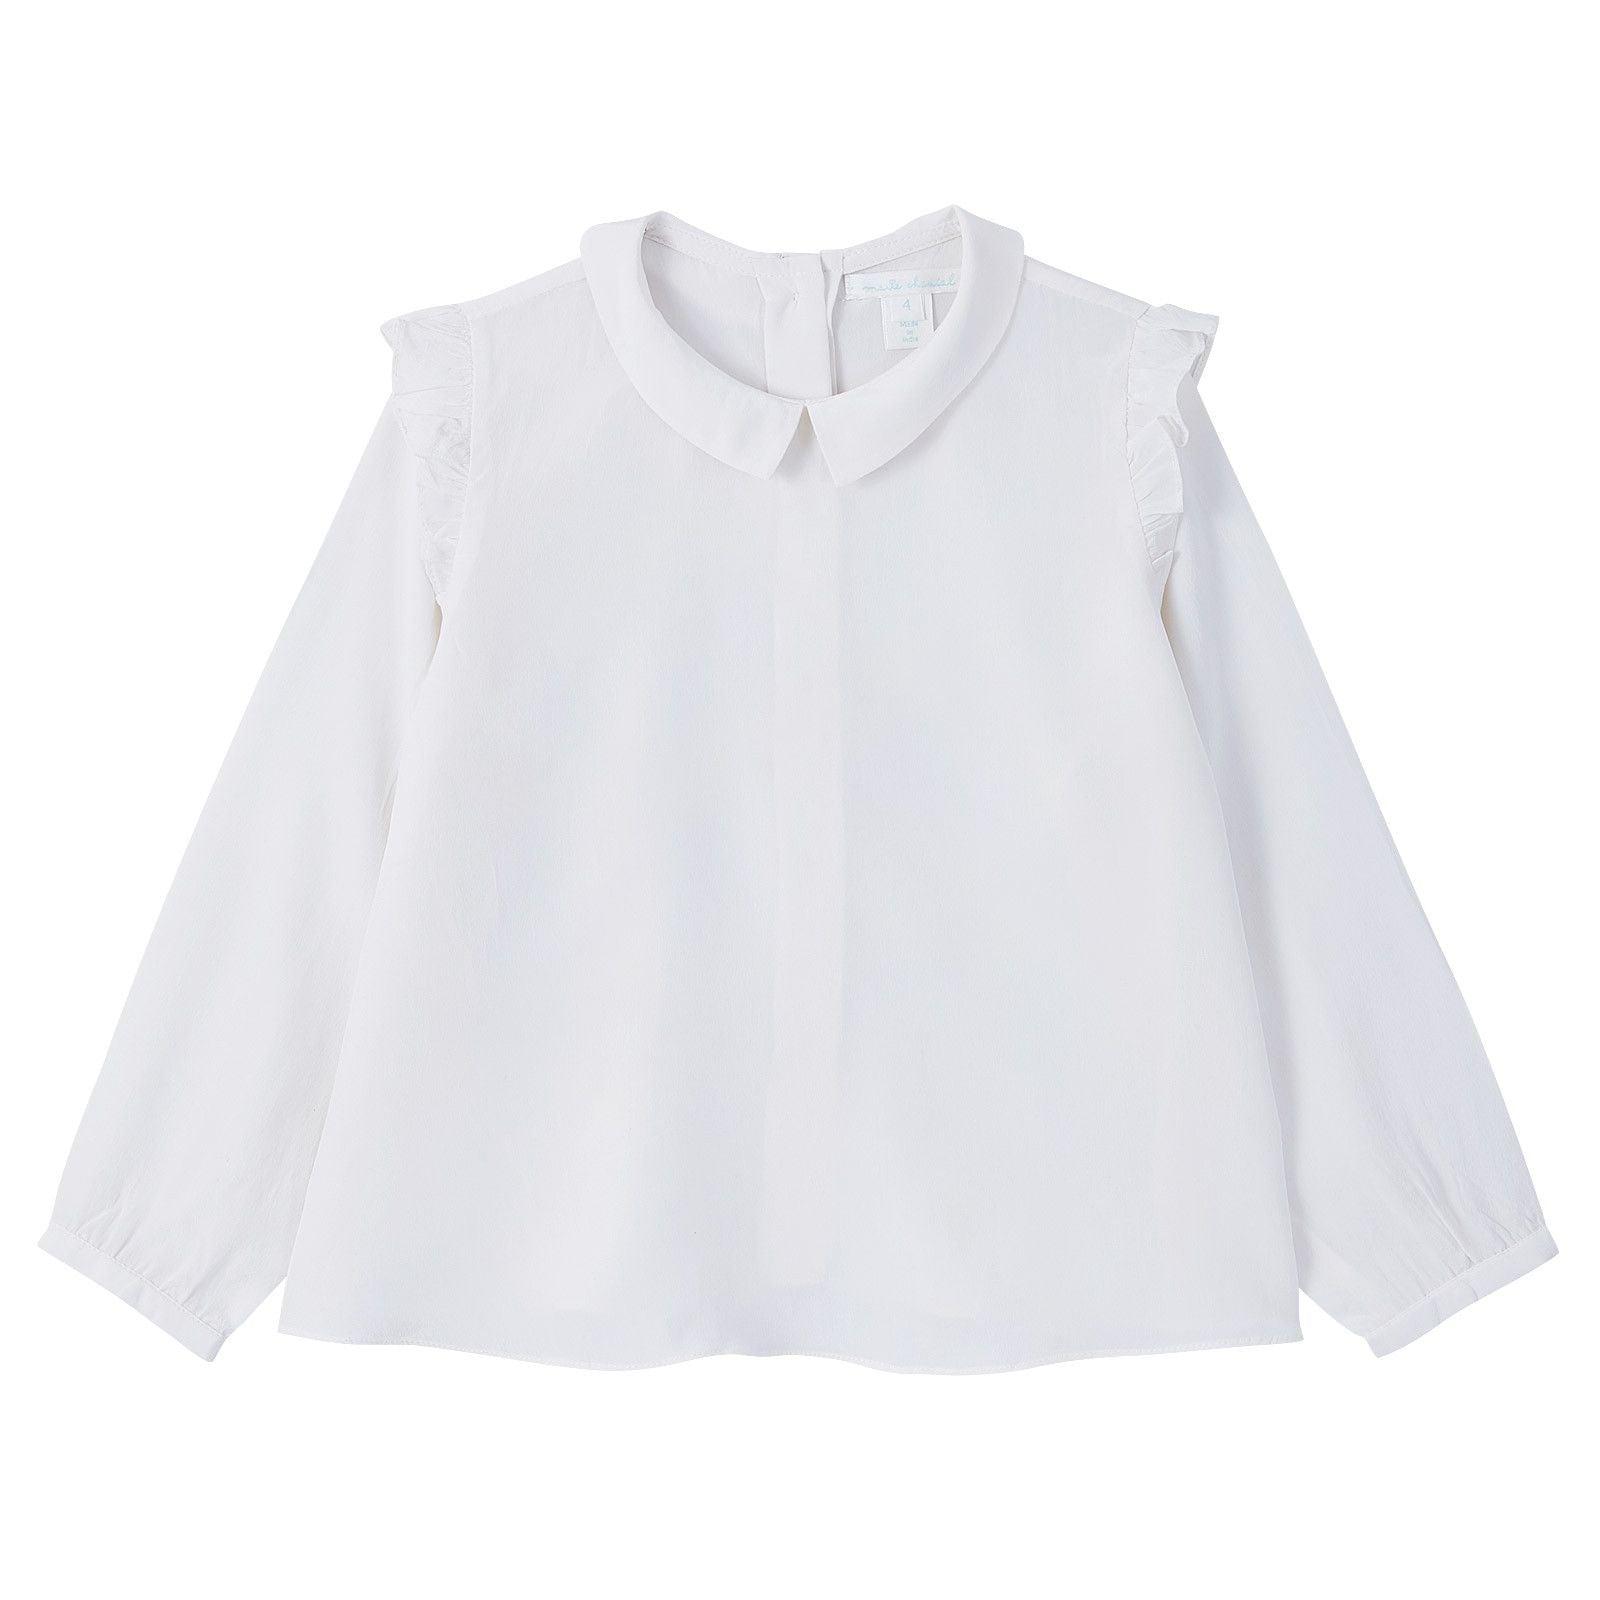 Girls Ivory Silk Blouse With Frilly Shoulder - CÉMAROSE | Children's Fashion Store - 1